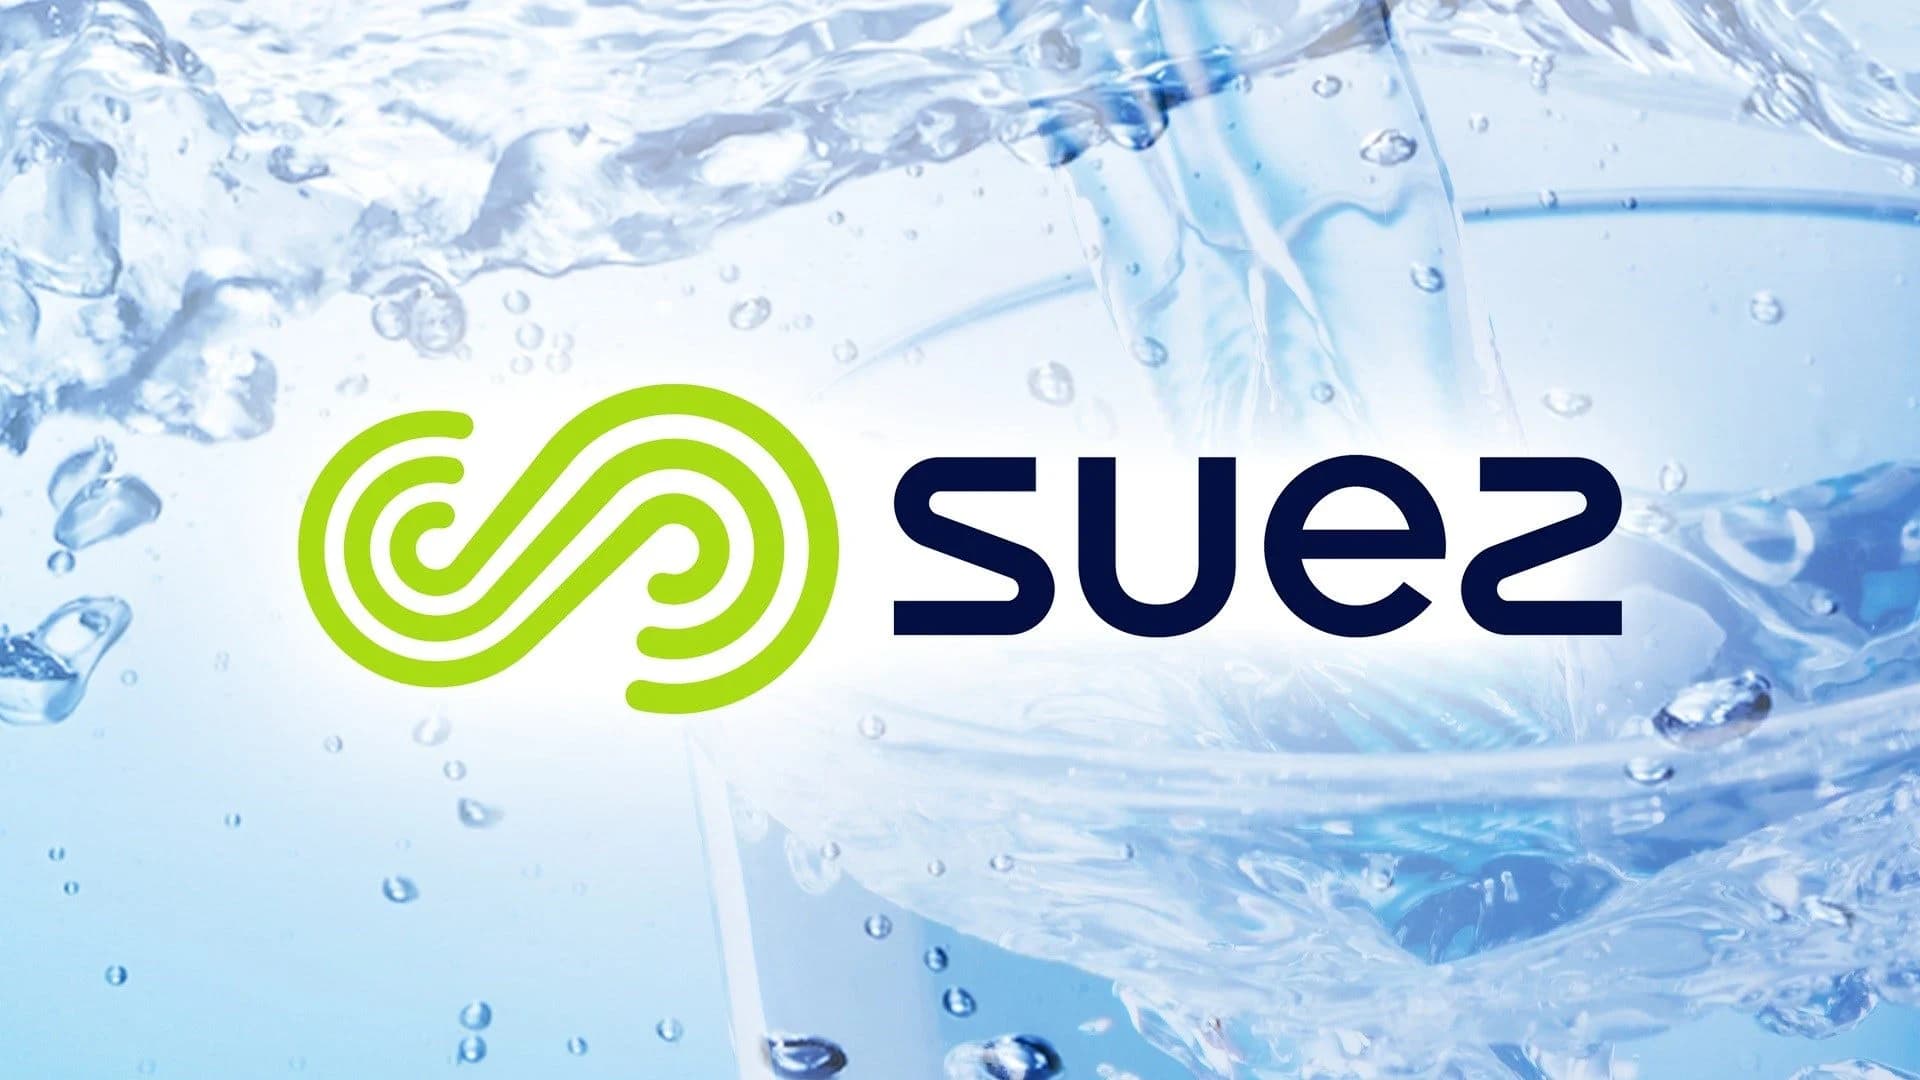 Suez Water issues warning about lead in water to certain customers